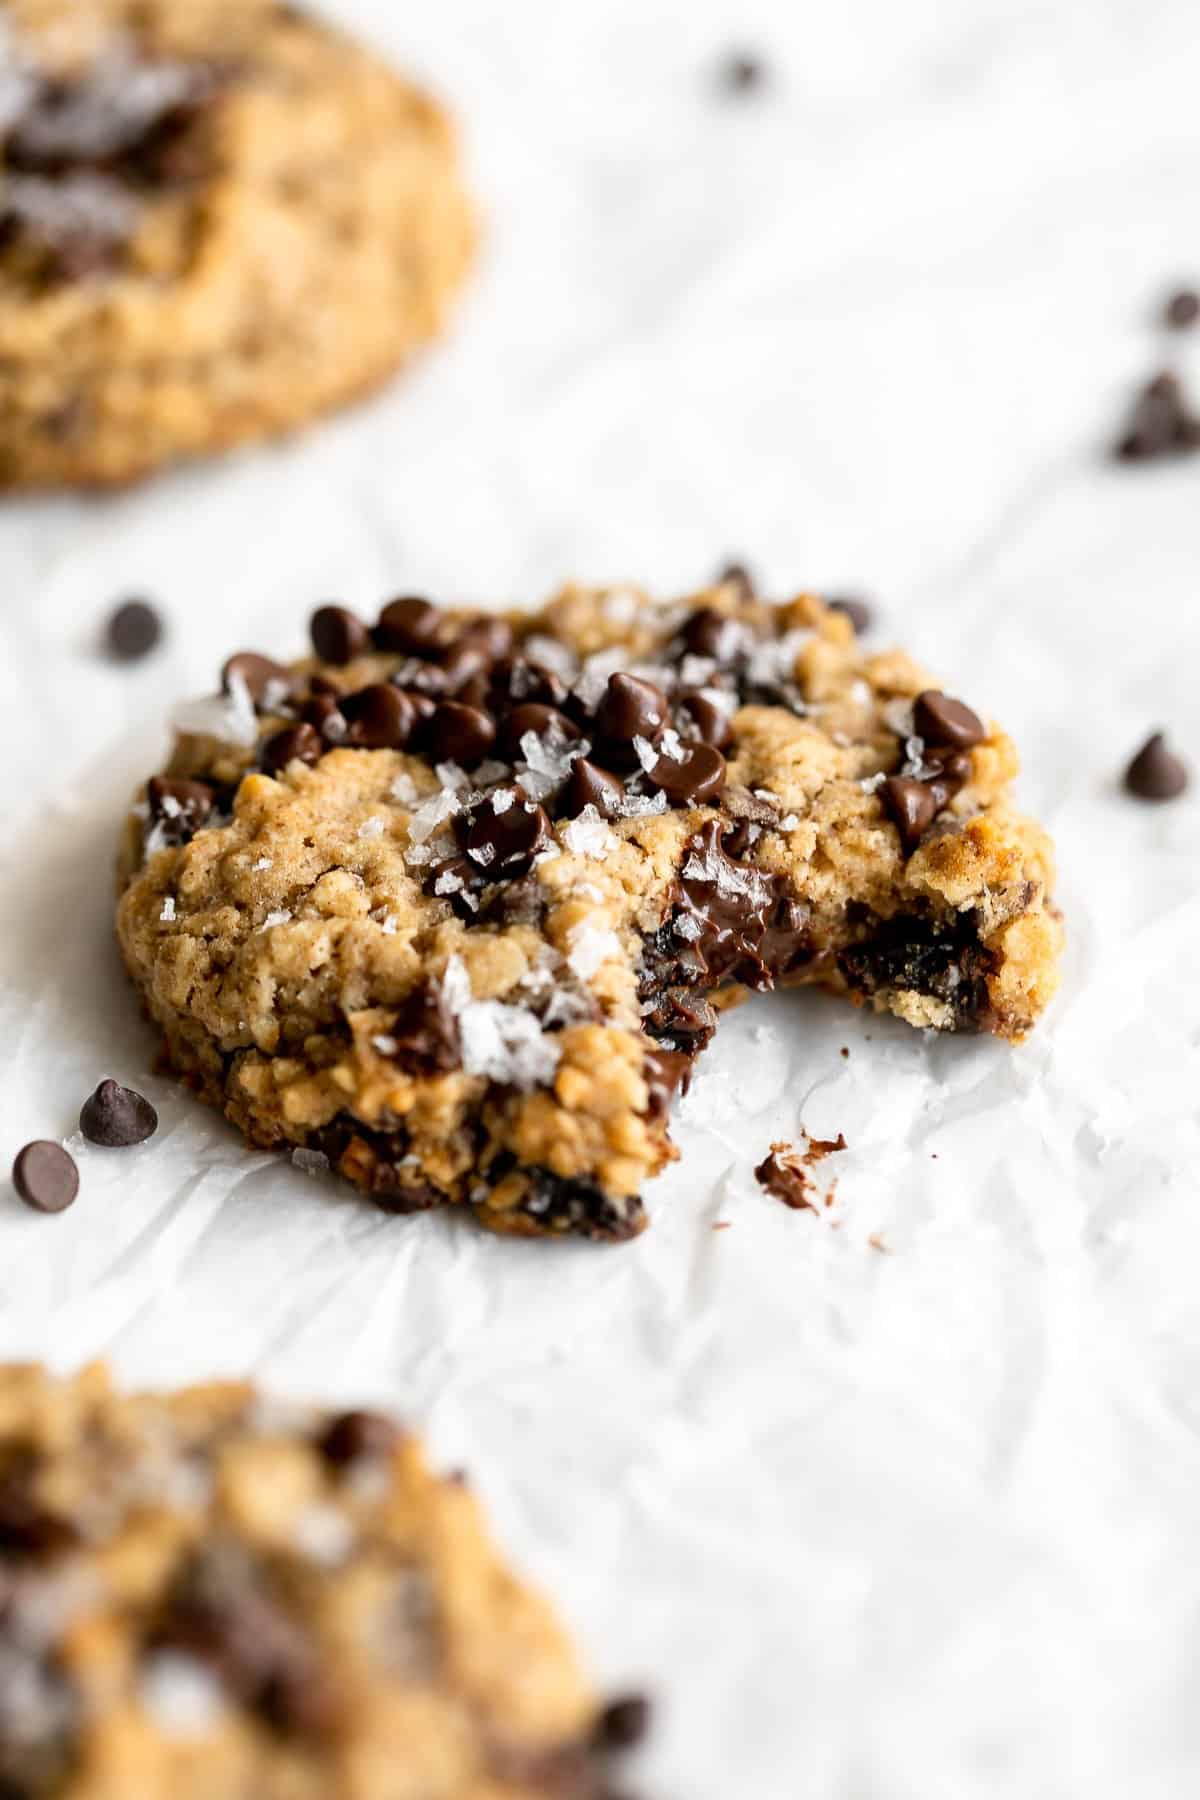 vegan oatmeal raisin cookies with chocolate chips and a bite taken out